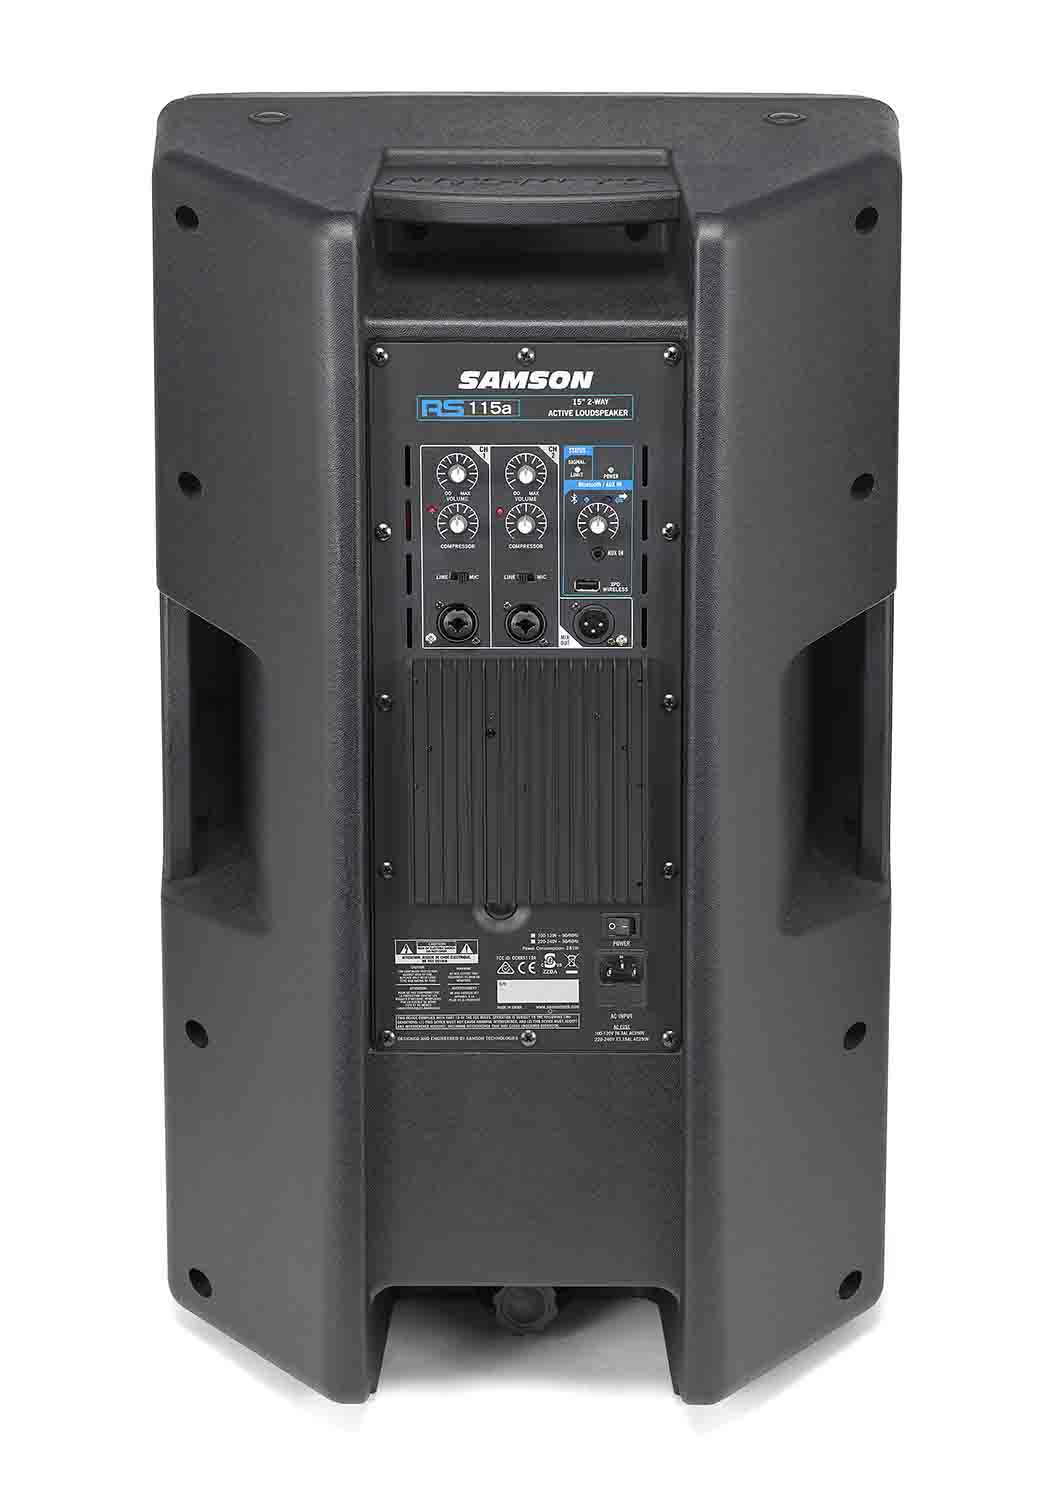 Samson RS115A 400W 2-Way Active Loudspeaker with Bluetooth - 15 Inch - Hollywood DJ